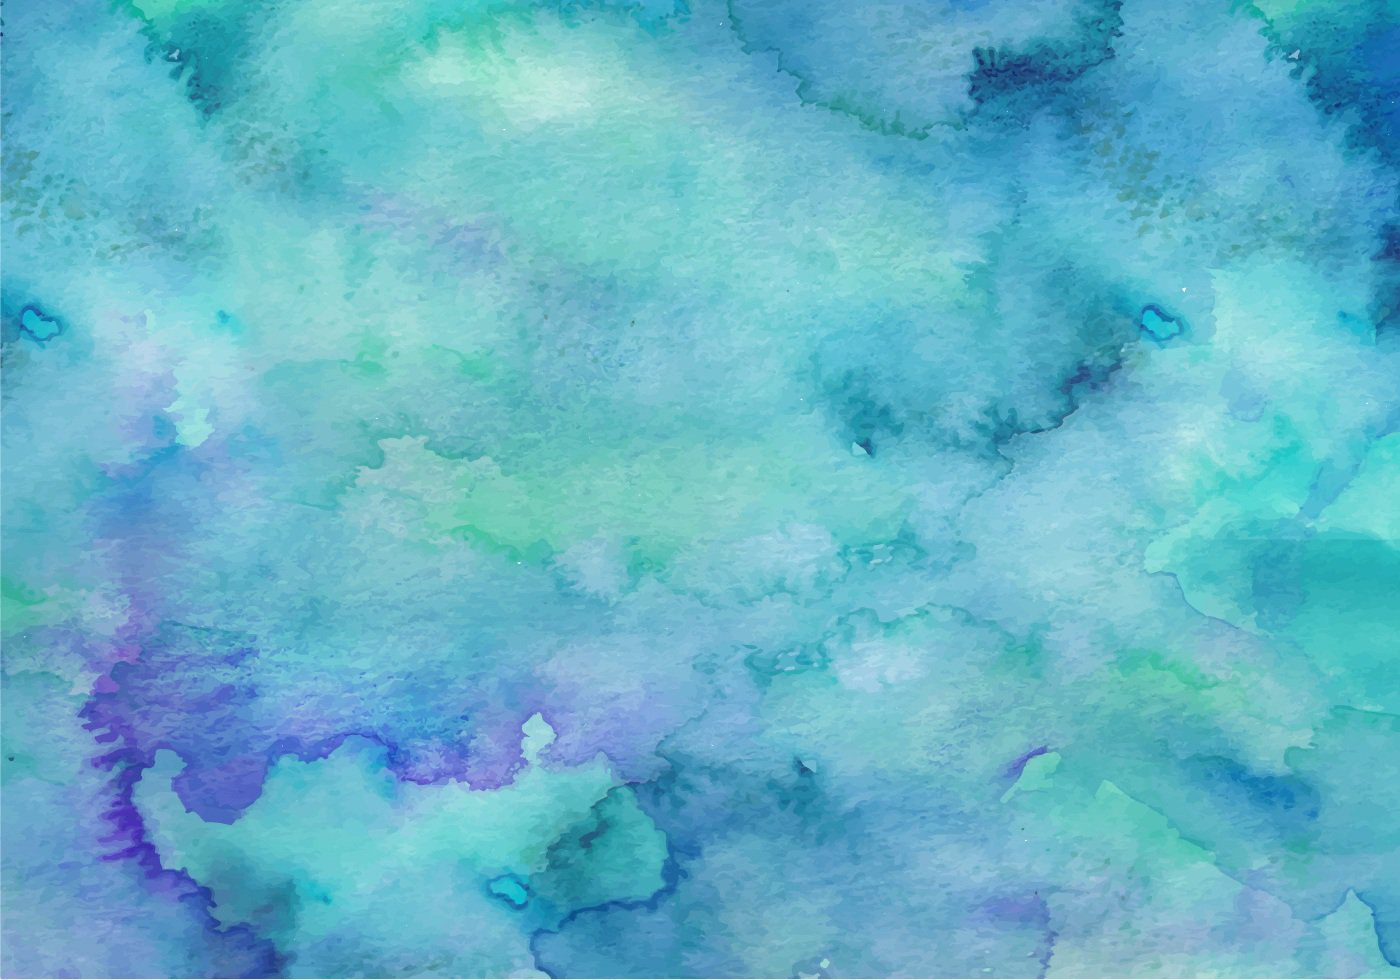 Teal Free Vector Watercolor Background - Free To Use Watercolor Background  - 1400x980 Wallpaper 